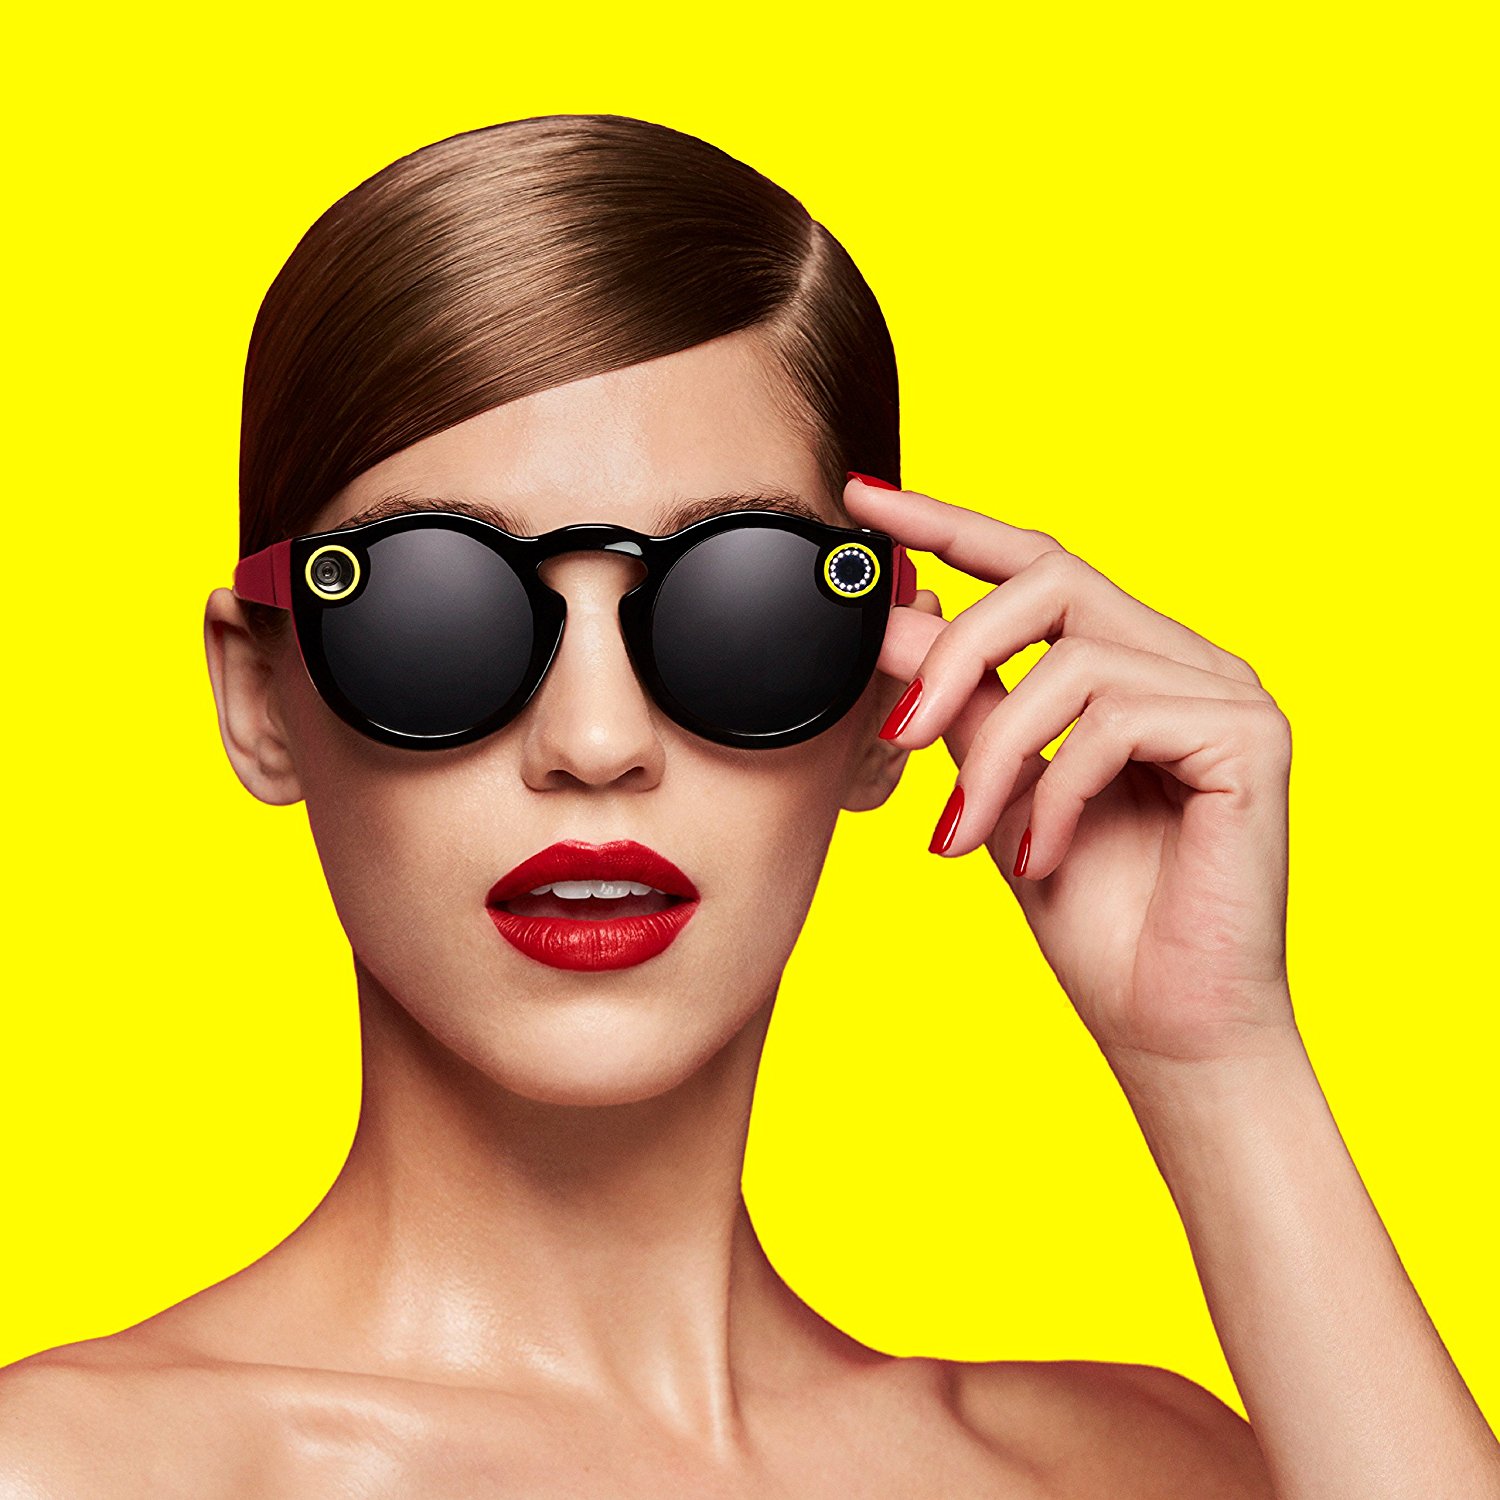 Snapchat Spectacles: Newest Popular Must-Have Gadget